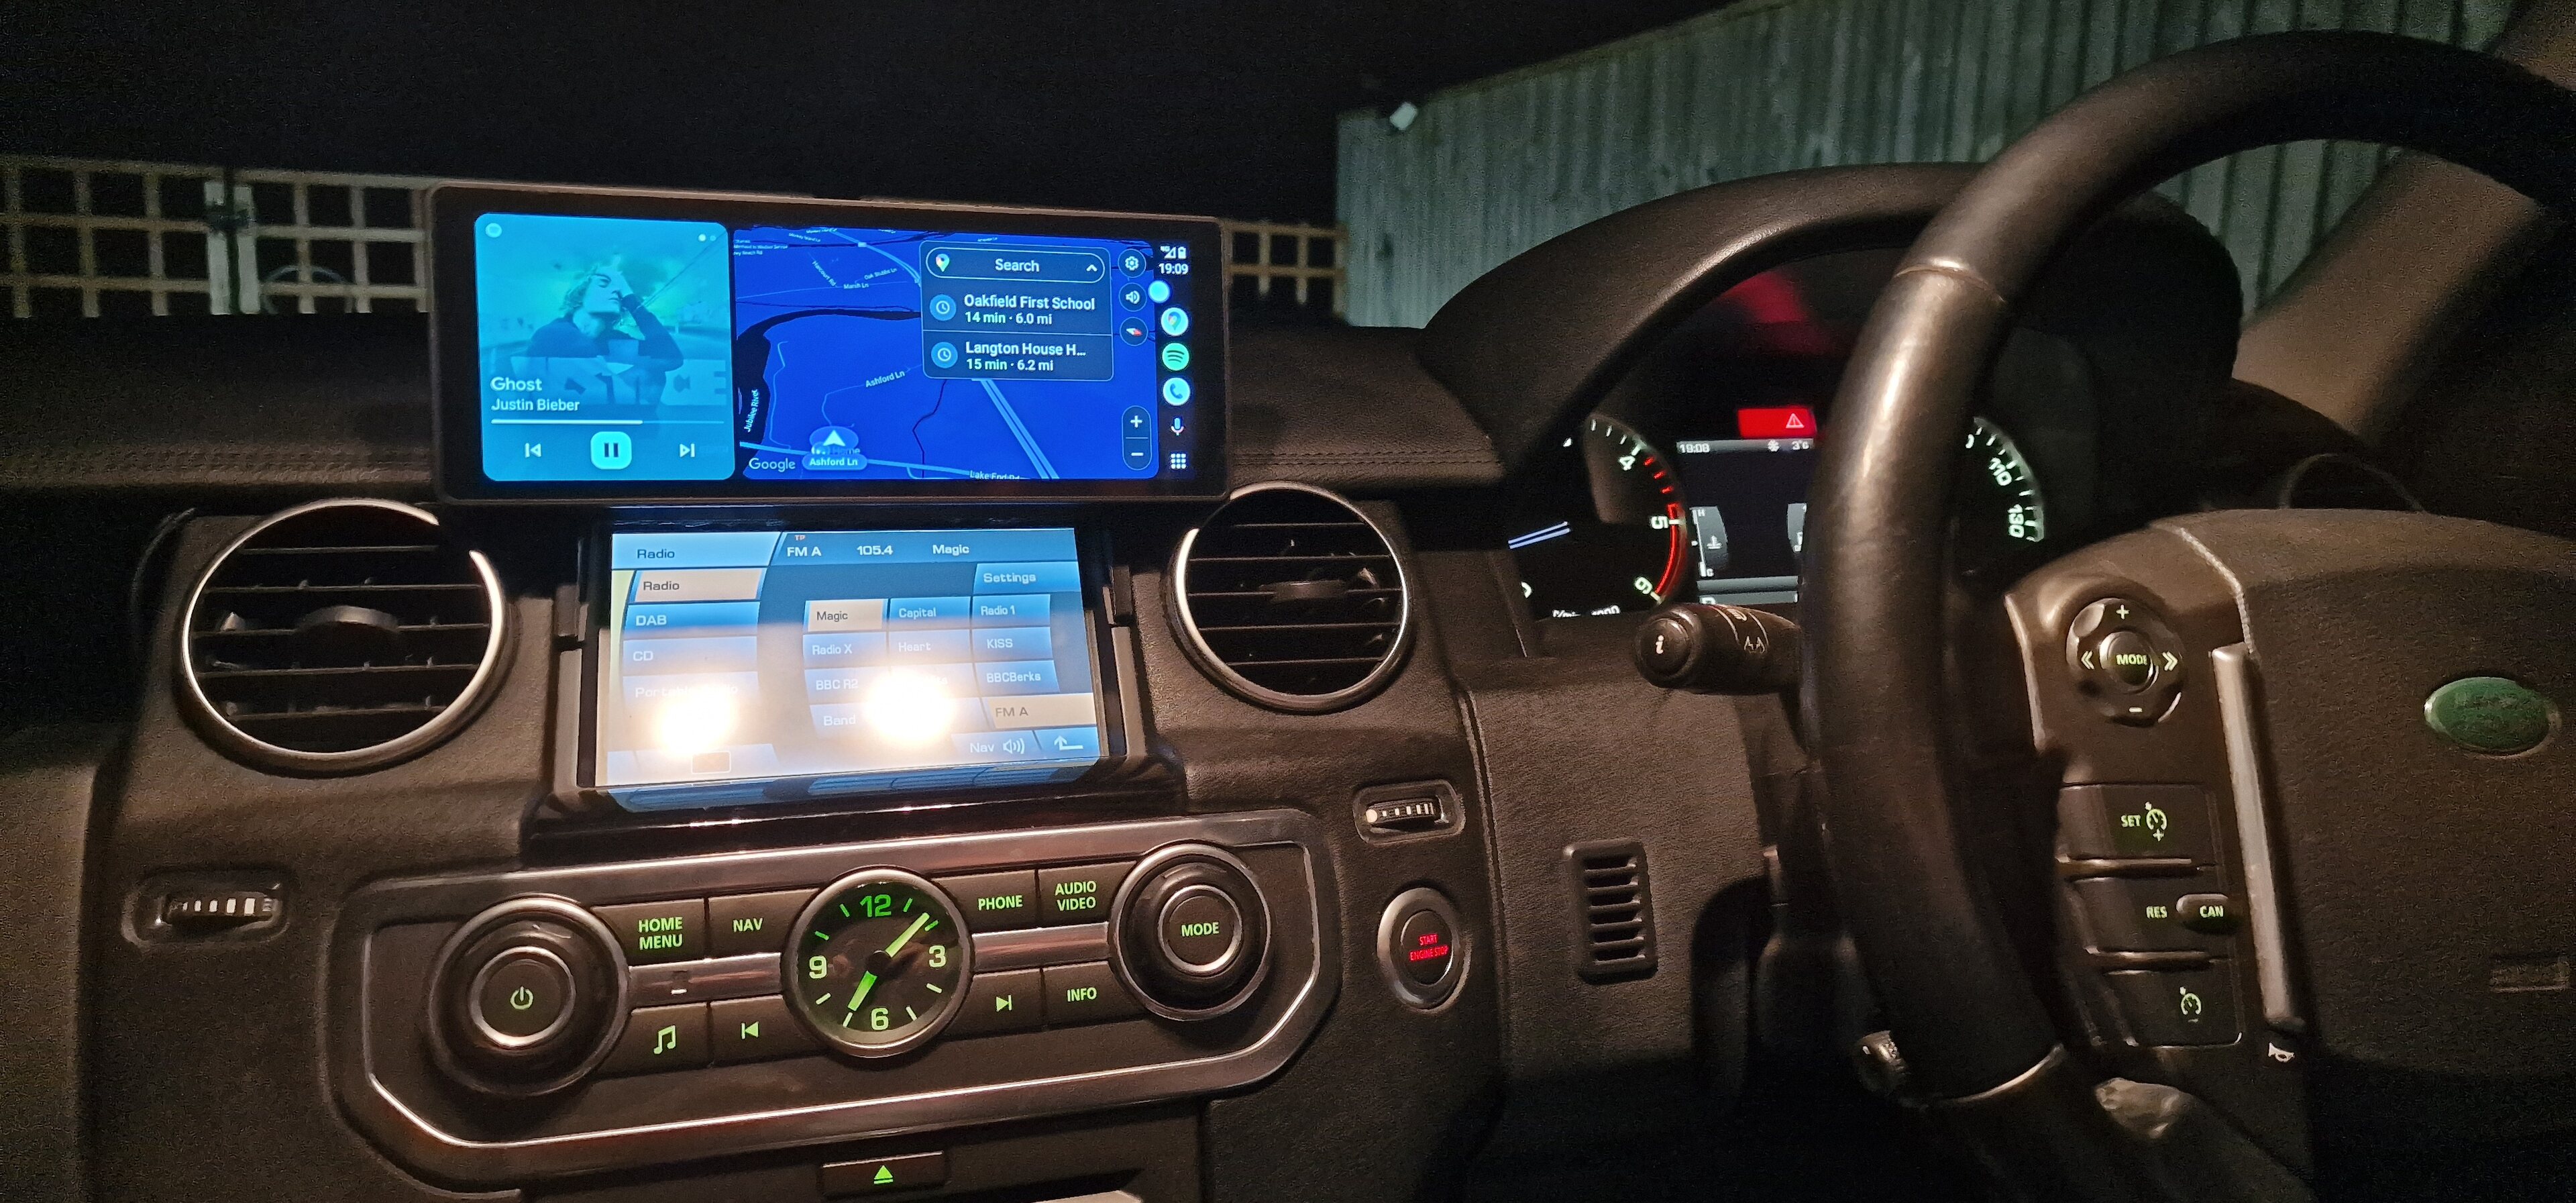 Pistonheads - The image shows a vehicle's interior, specifically the cockpit and dashboard area. At the center of the dashboard is a screen displaying various car-related information such as speed, fuel level, and engine status. The steering wheel, visible on the left side, features controls for the car's infotainment system. The vehicle appears to be an SUV or a crossover type vehicle.